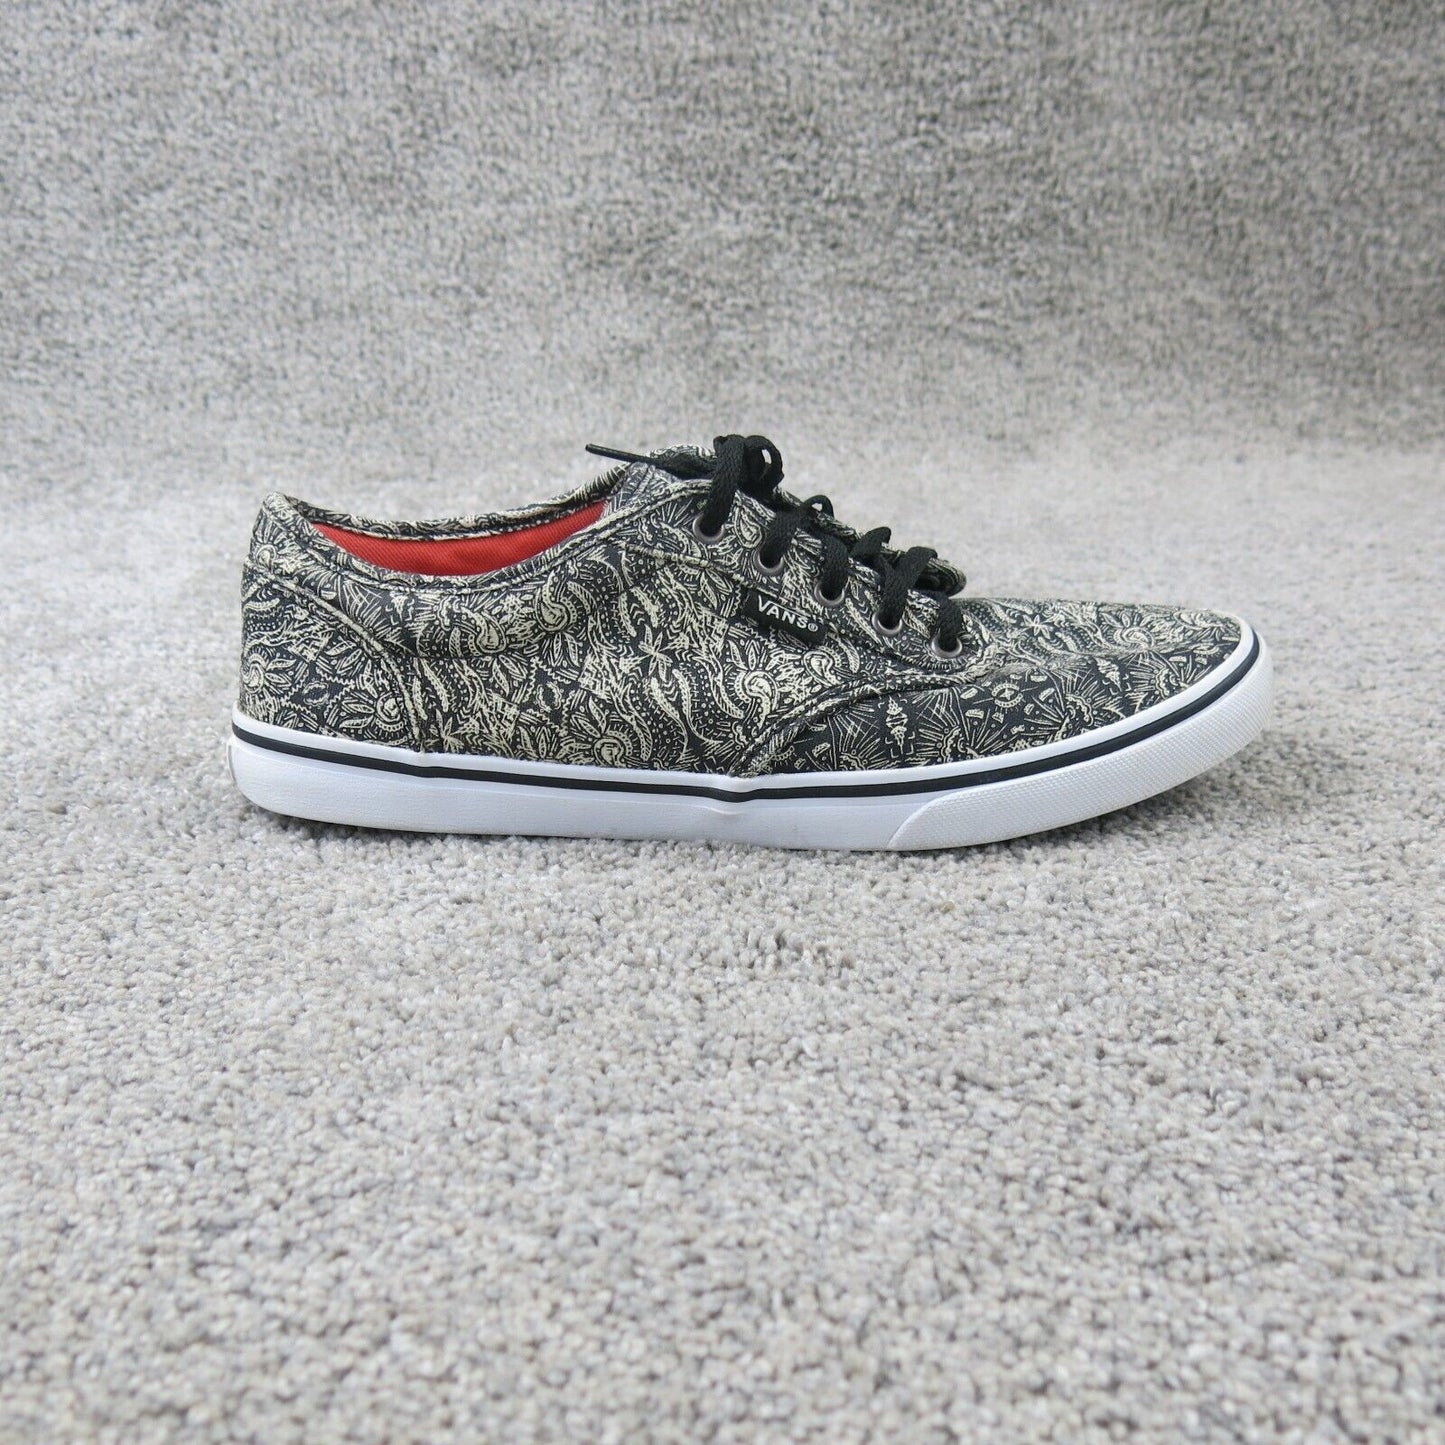 Vans Womens Off The Wall Old Skool Shoes 5000200 Gray Ivory Paisley Sneaker US 8